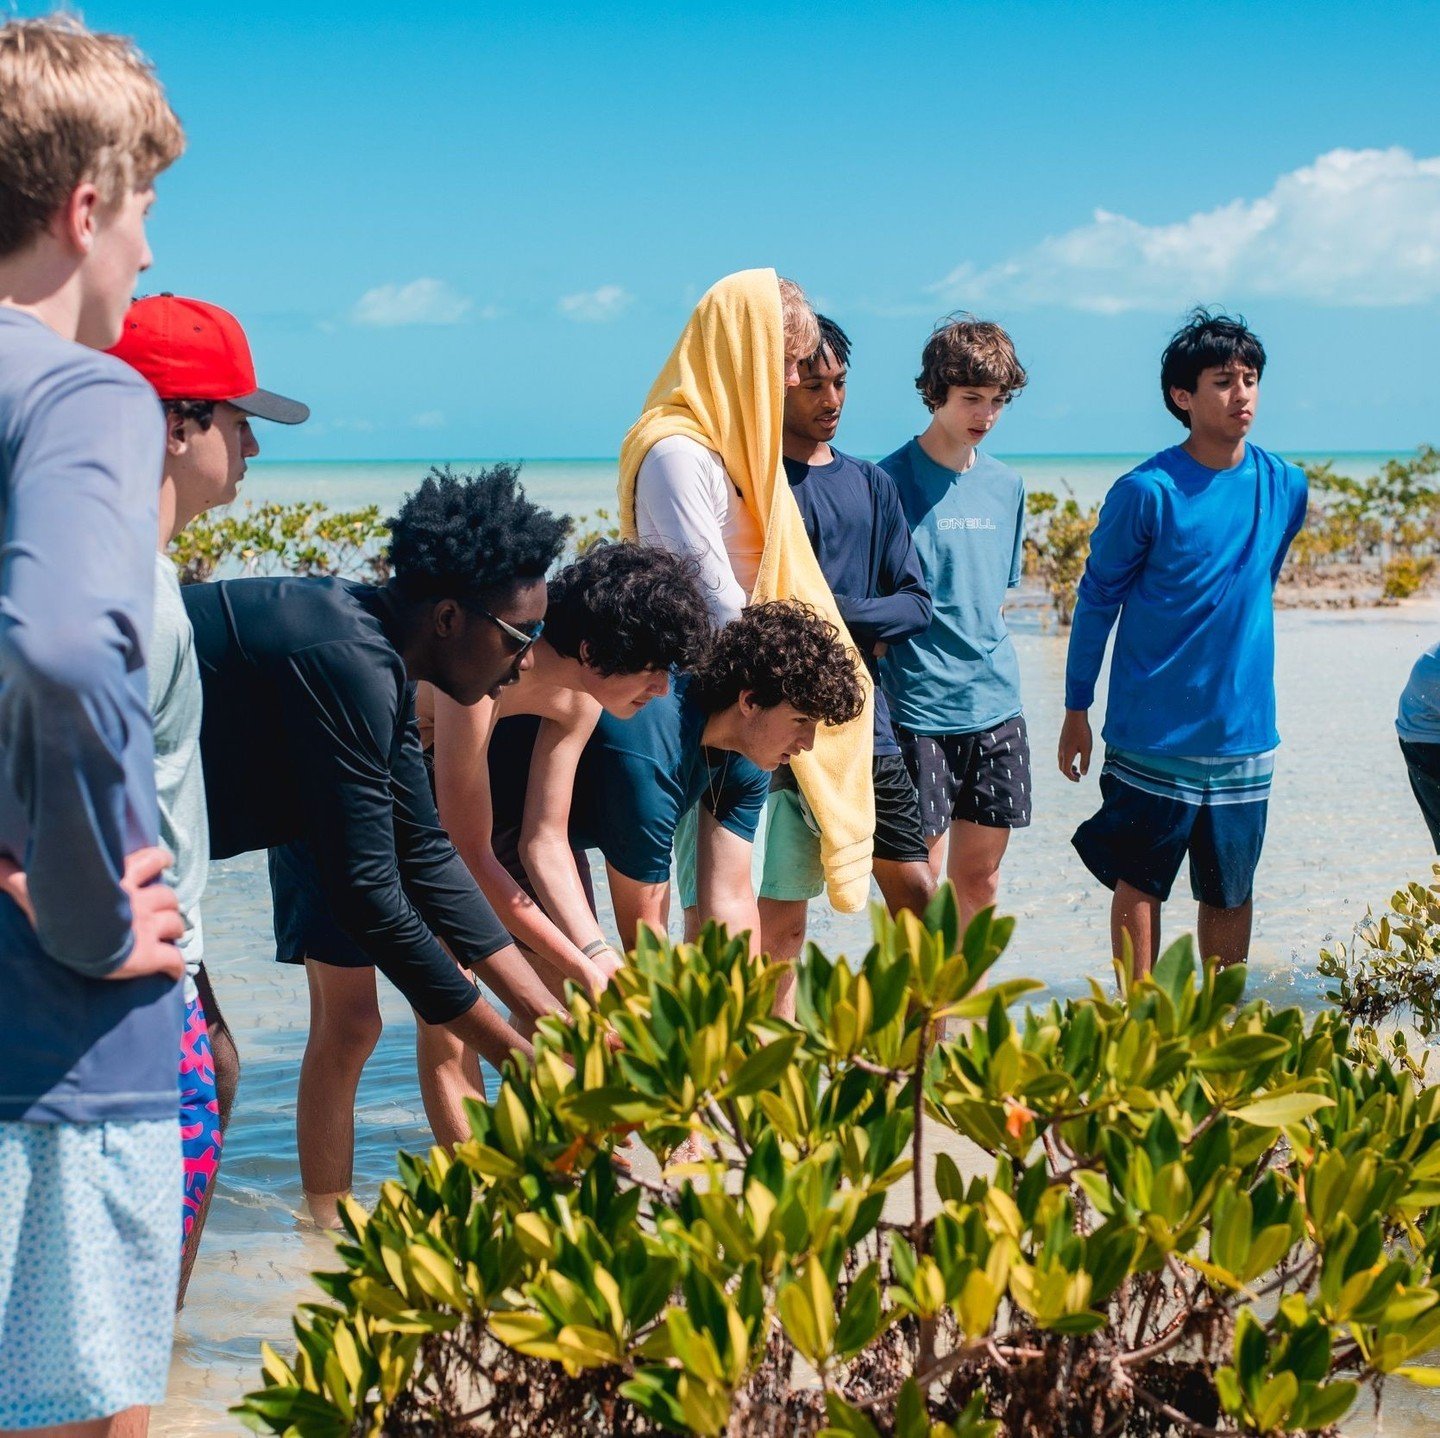 One of the most highlights of our Grade 9 curriculum is their study abroad program at @TheIslandSchool in The Bahamas!⁠ This unique trip takes students beyond the traditional classroom, immersing them in hands-on scientific research, sustainable livi